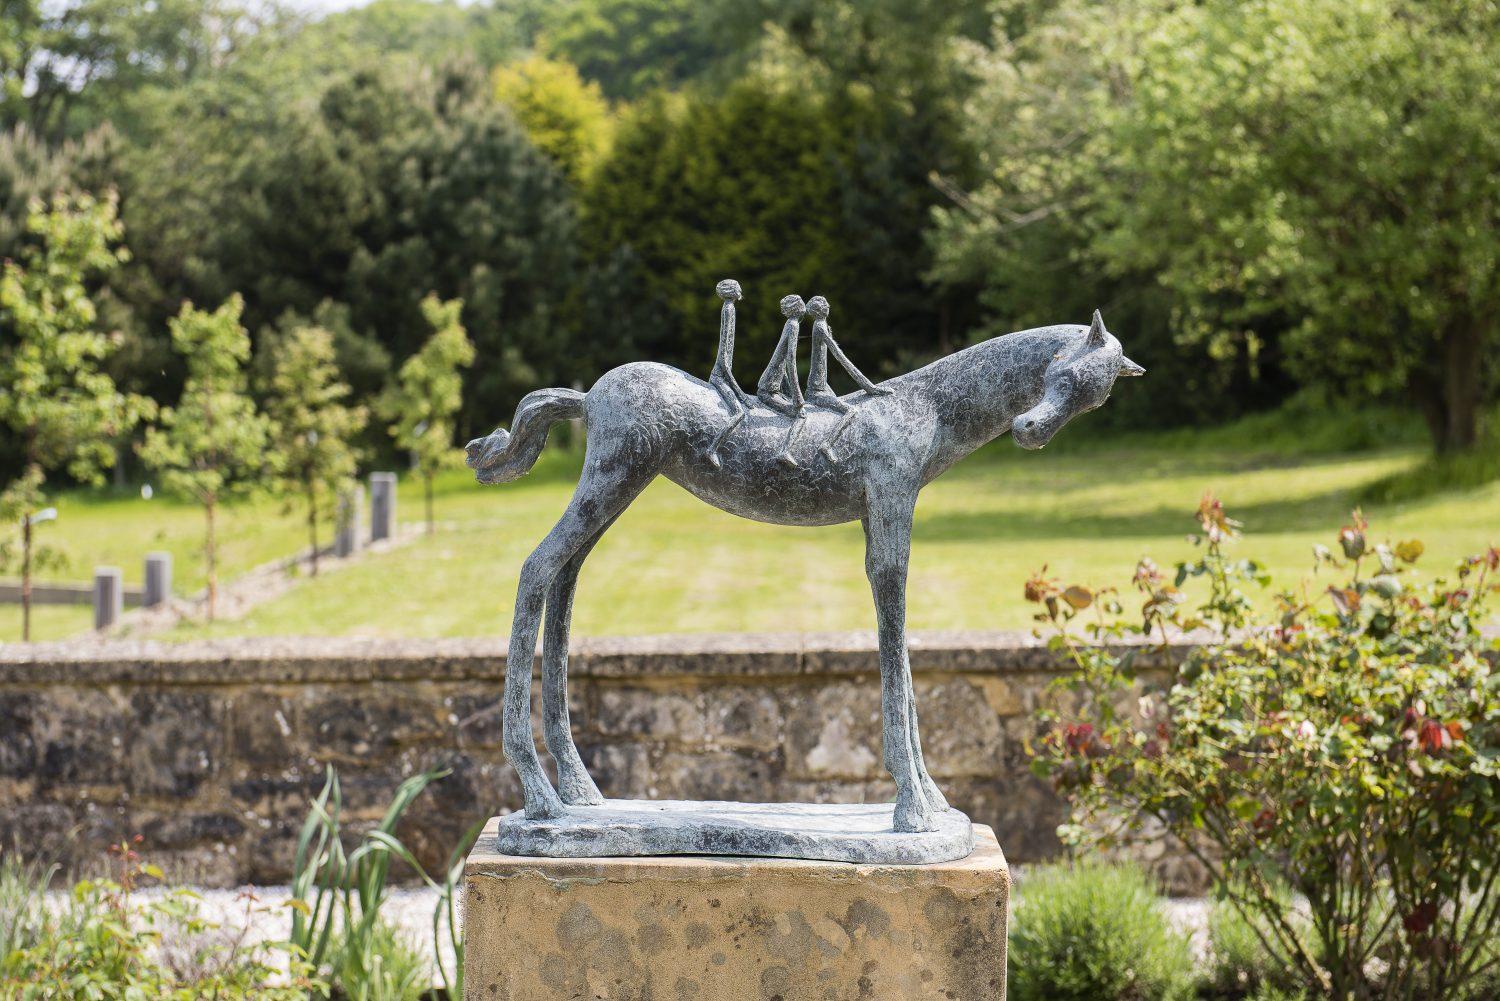 Sculptures by Carol Peace and Dawn Benson add interest on the terrace and among the borders